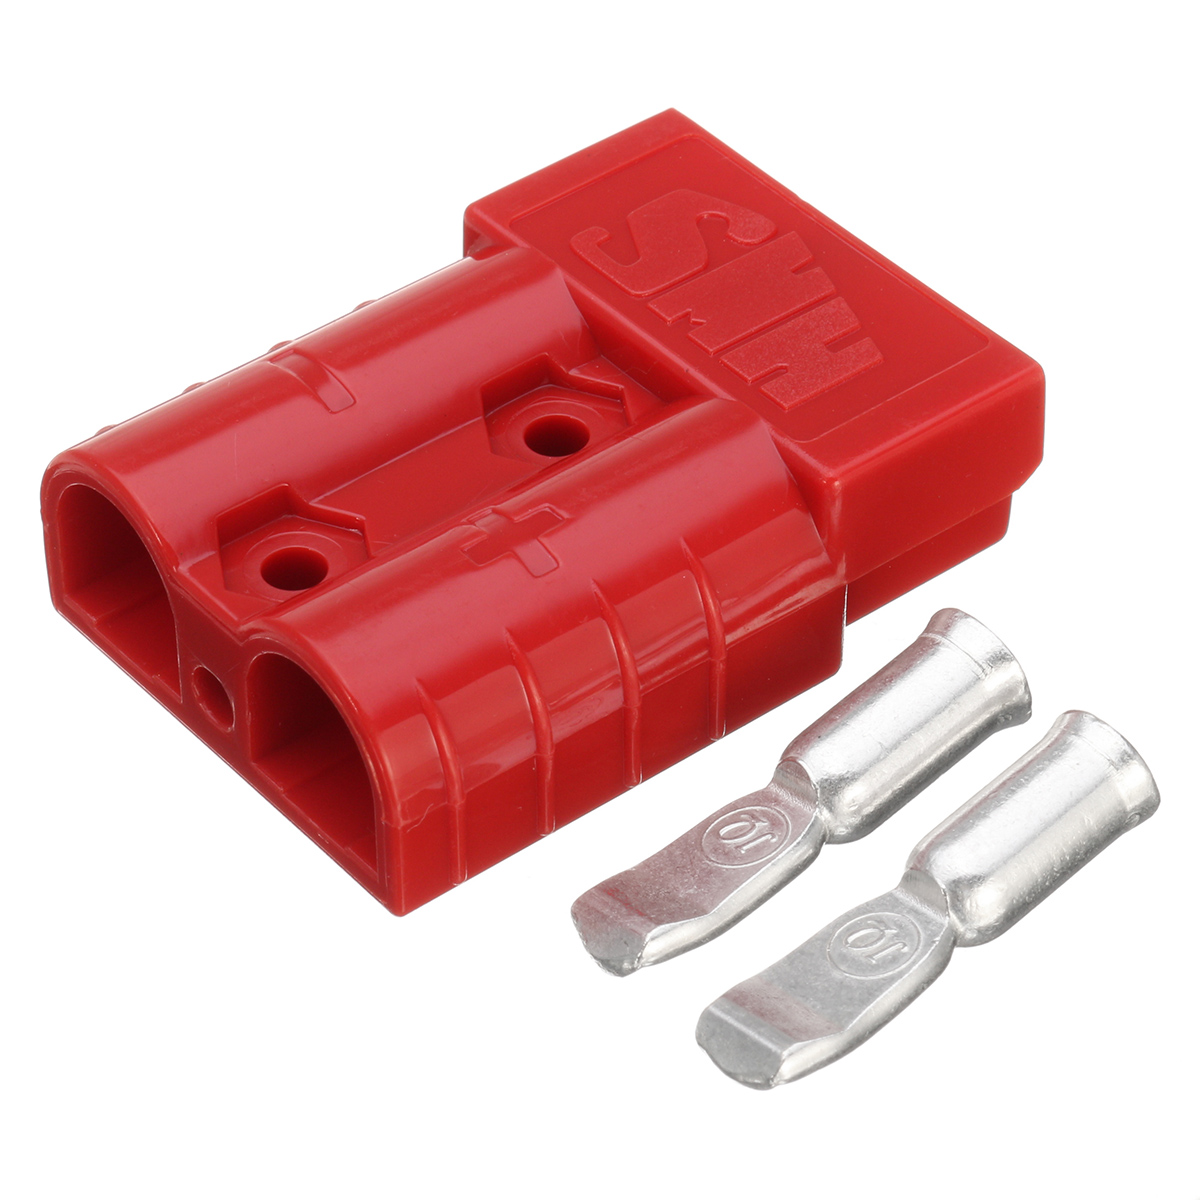 Excellway-50A-8AWG-Battery-Quick-Connector-Plug-Connect-Terminal-Disconnect-Winch-Trailer-Red-1170740-1